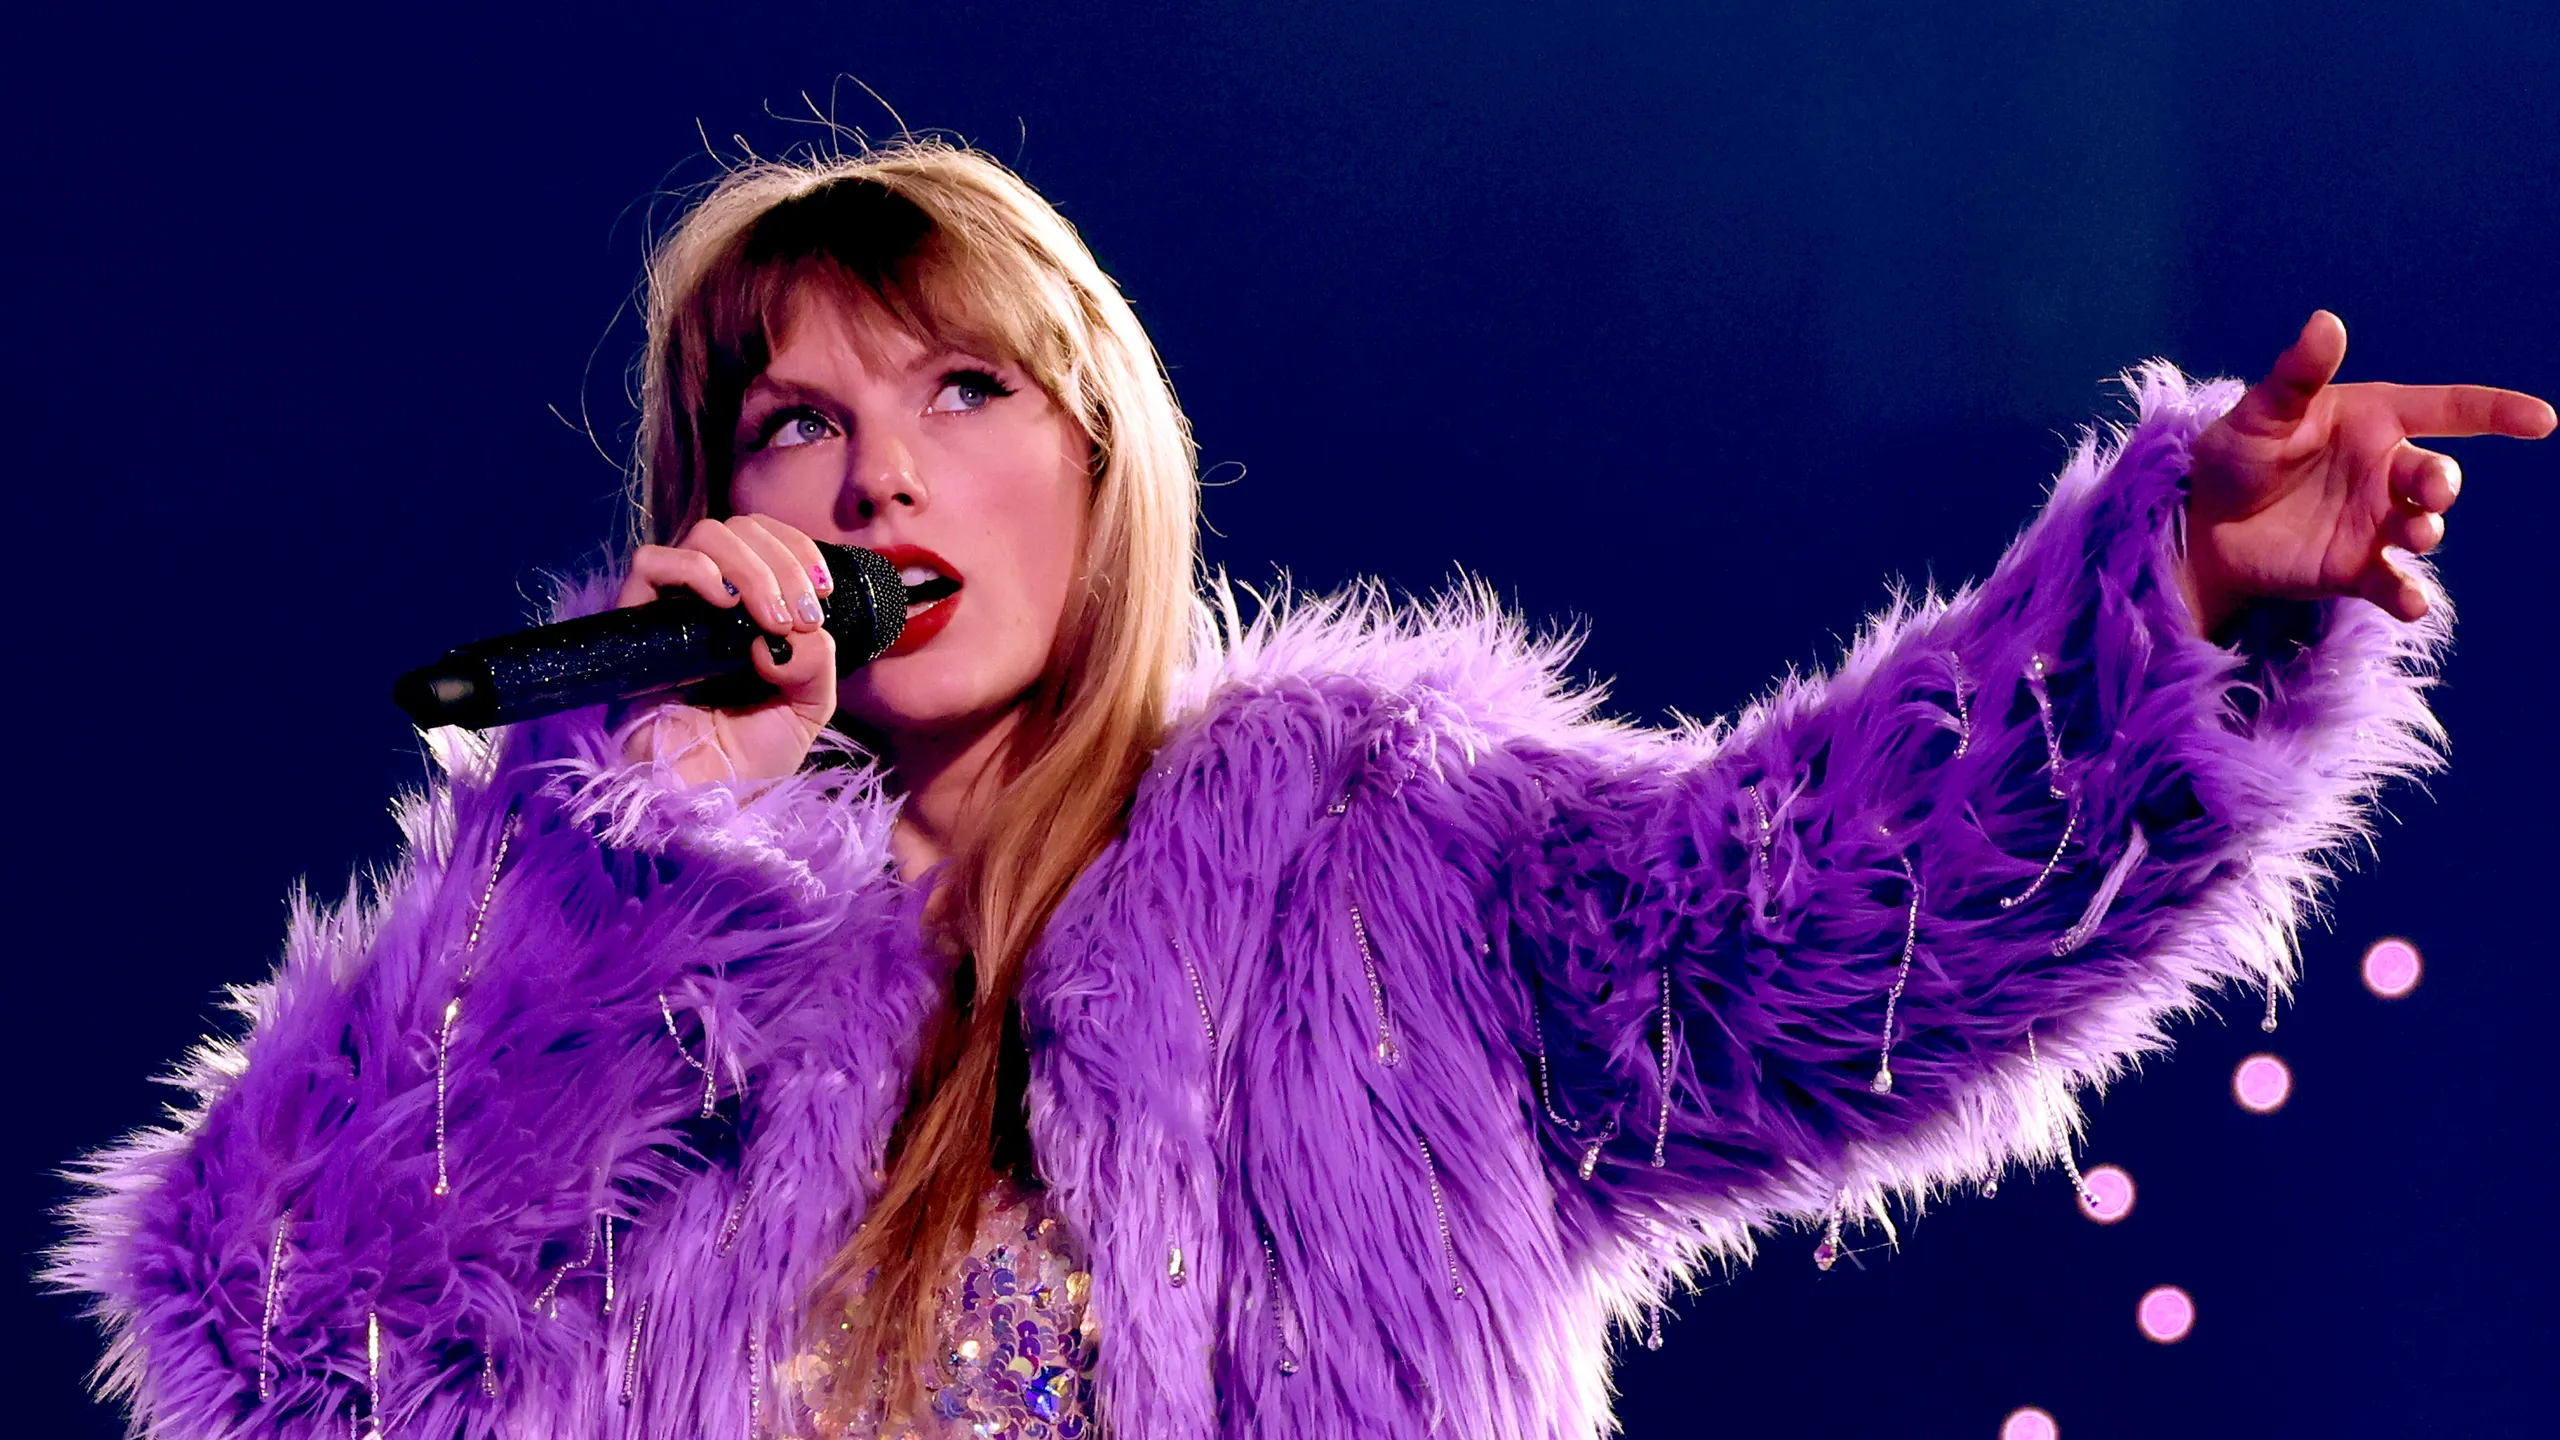 Man accuses Taylor Swift of staging Demonic Rituals